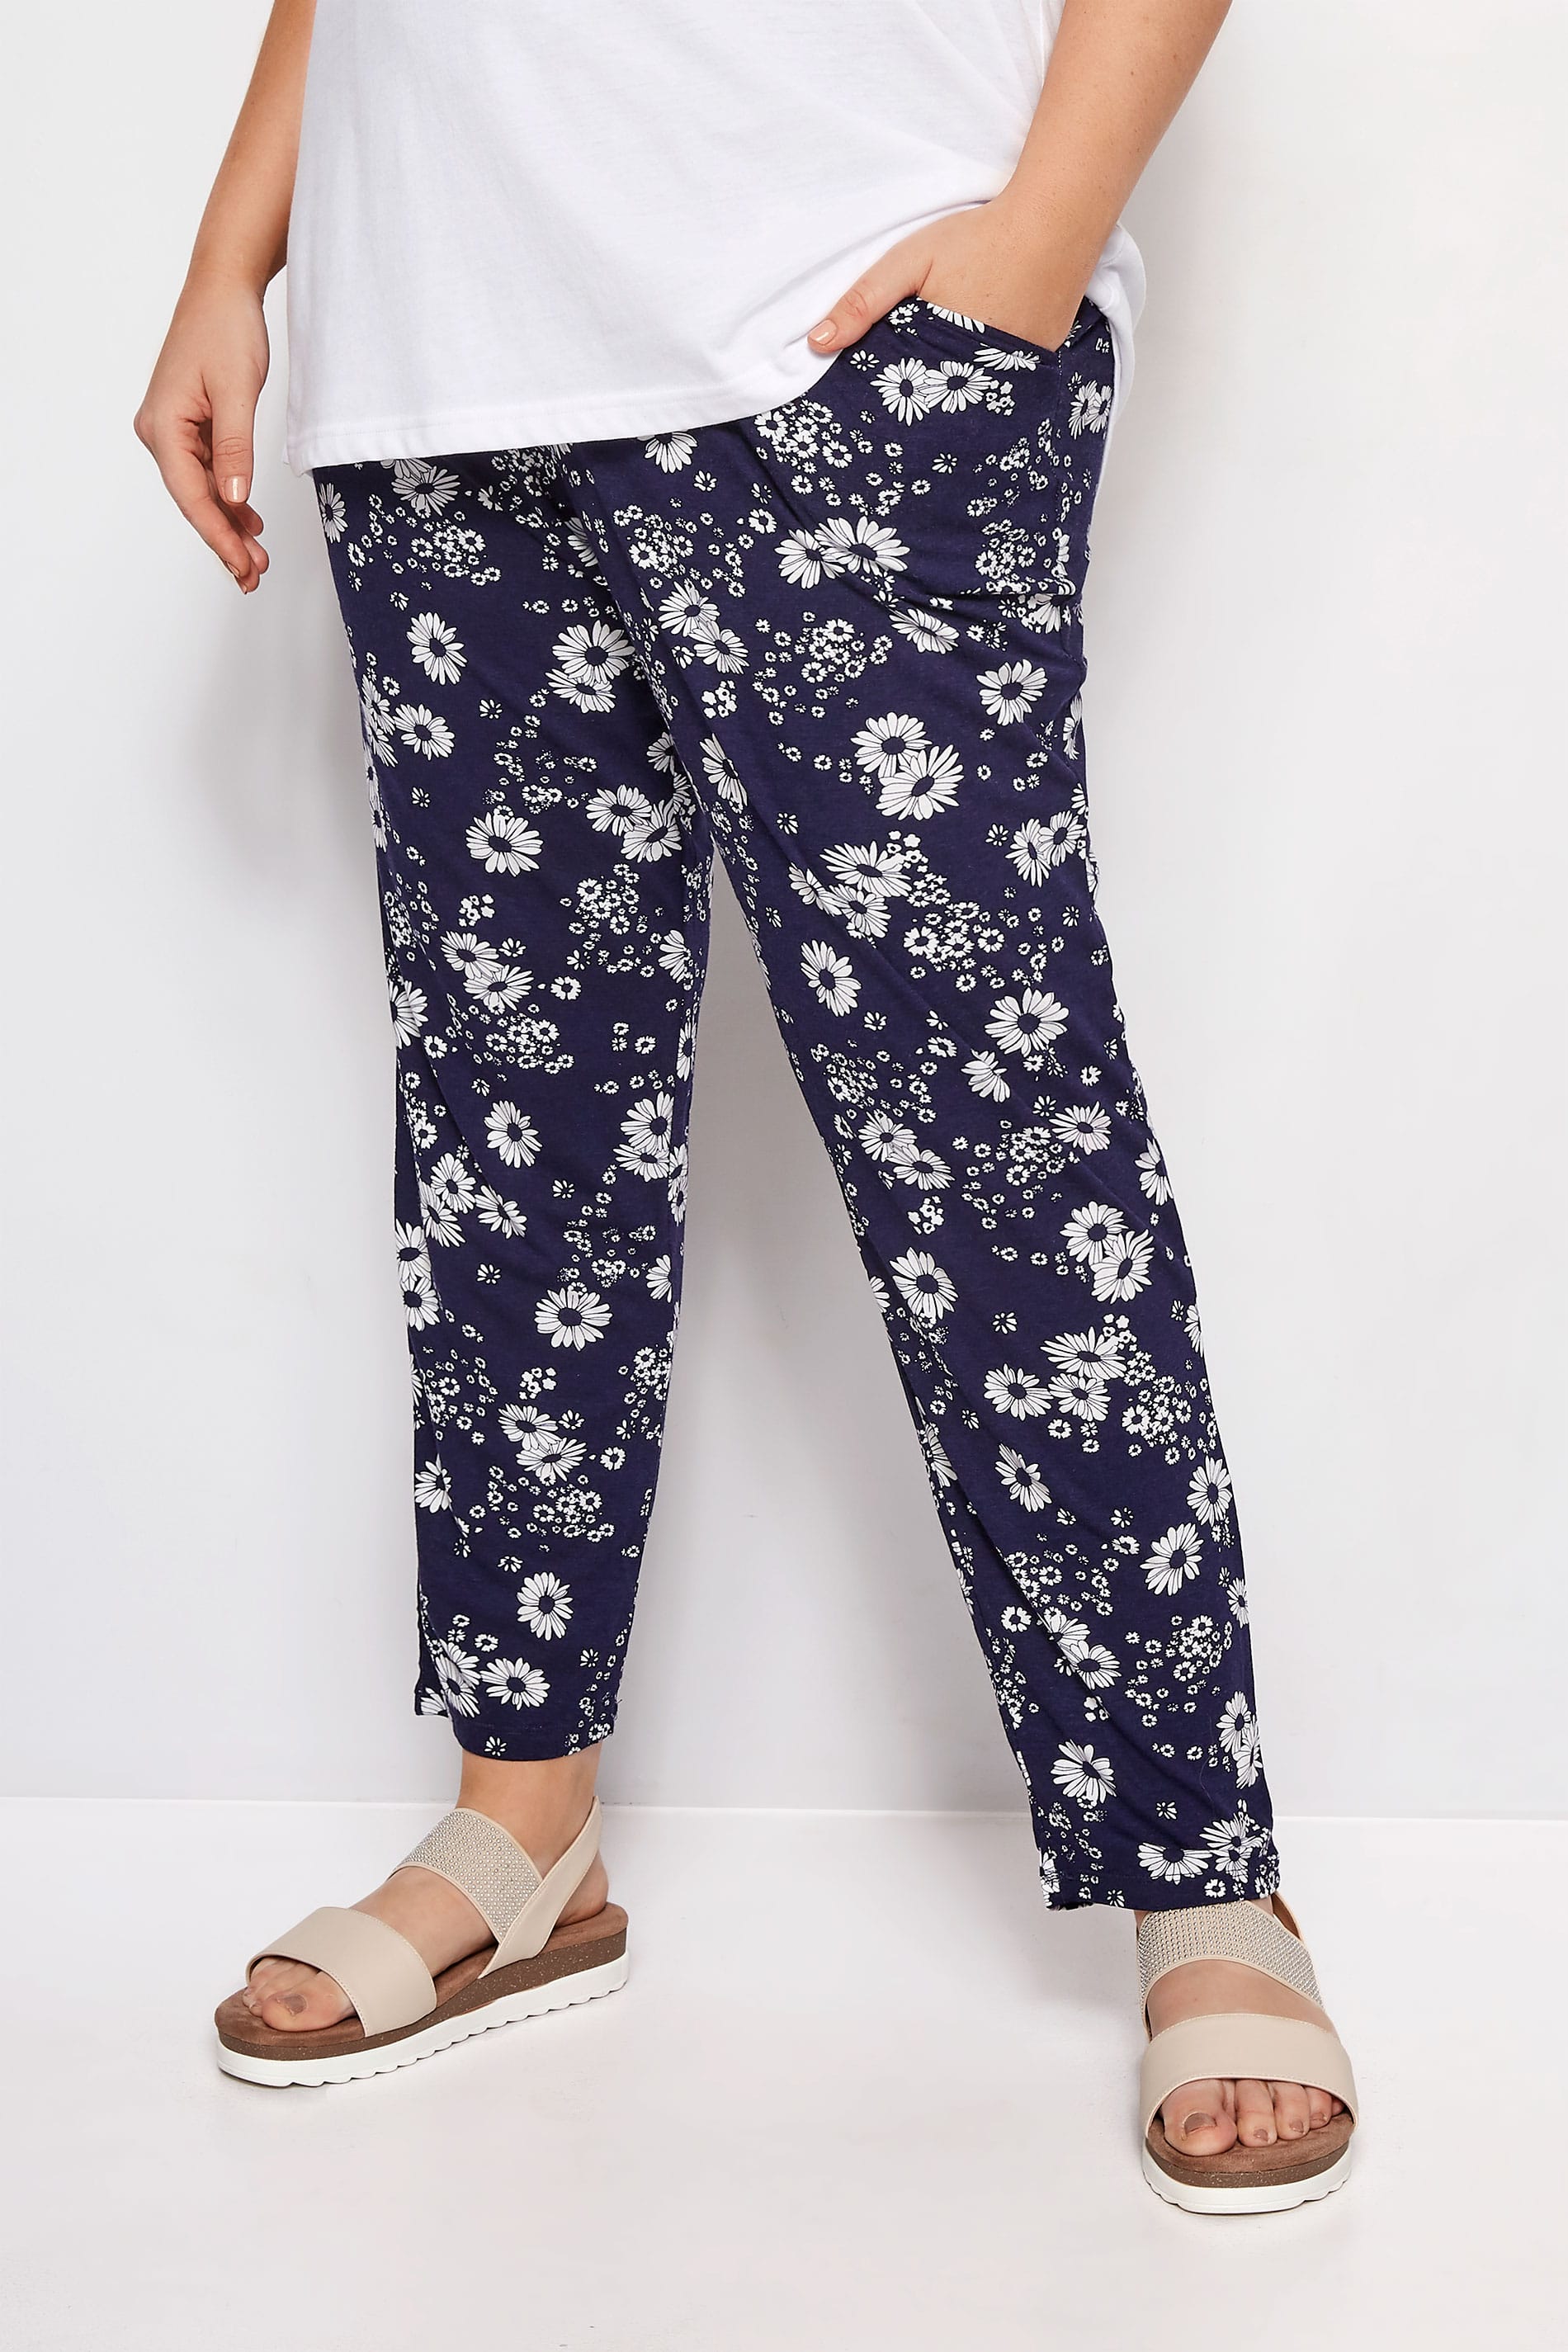 Navy Floral Print Jersey Harem Trousers, Plus size 16 to 36